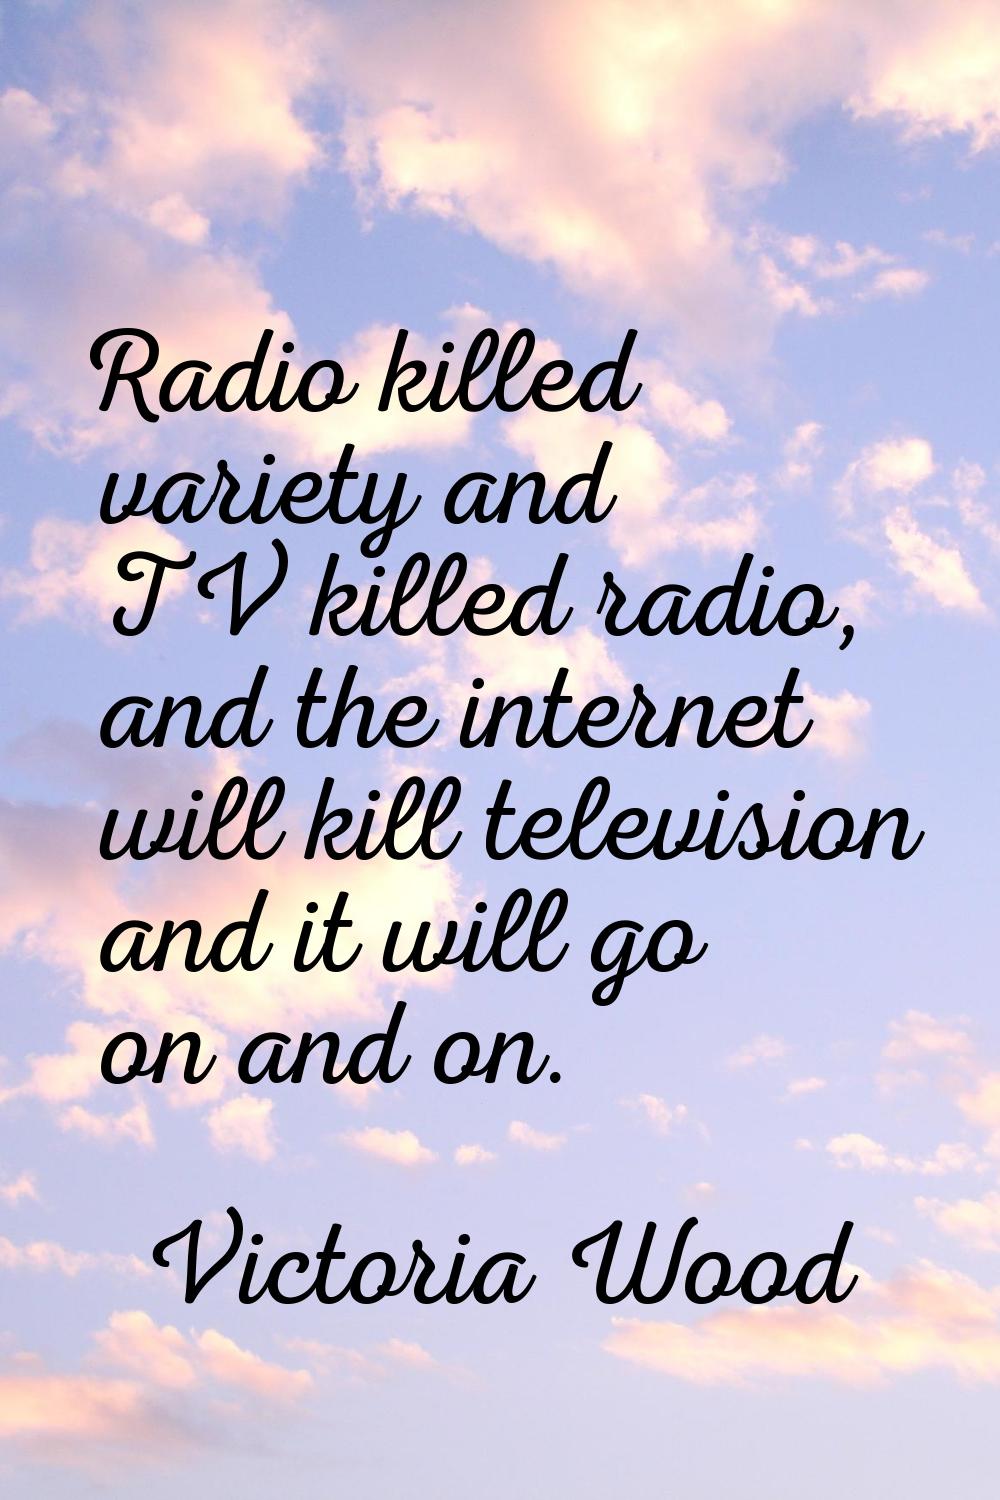 Radio killed variety and TV killed radio, and the internet will kill television and it will go on a